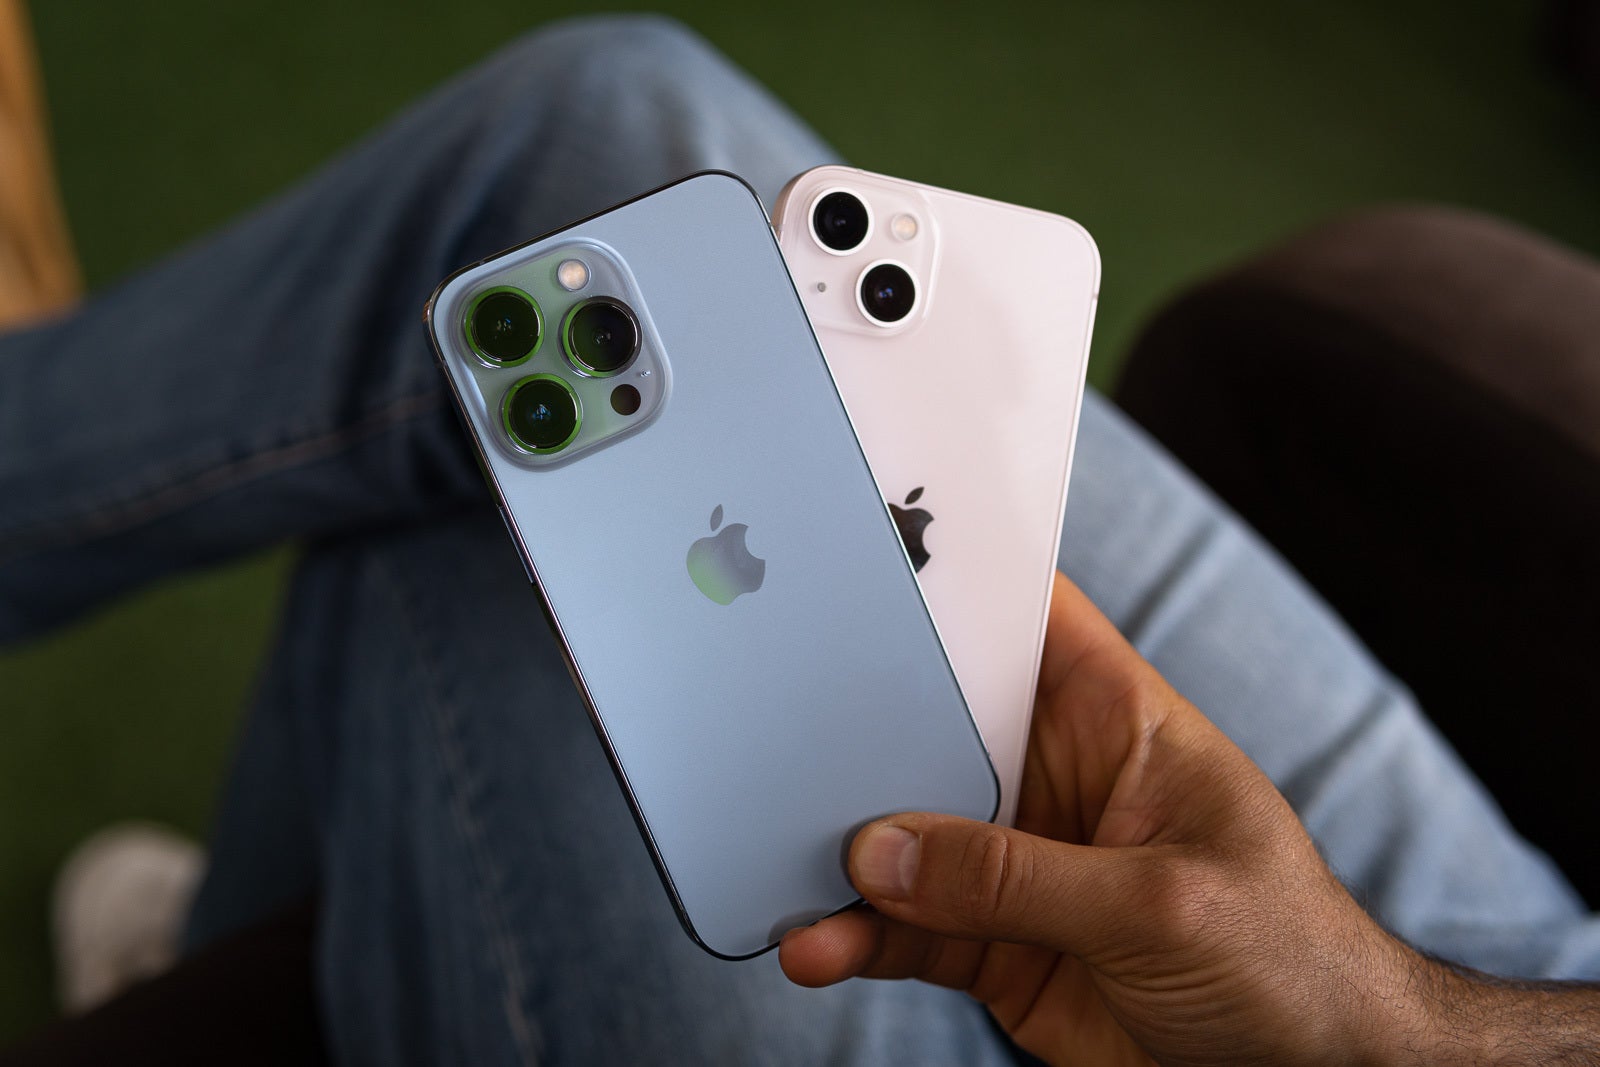 Looks like the iPhone 13 lineup is bad news for other brands - Suppliers prioritize Apple over Samsung and other manufacturers due to high iPhone 13 demand